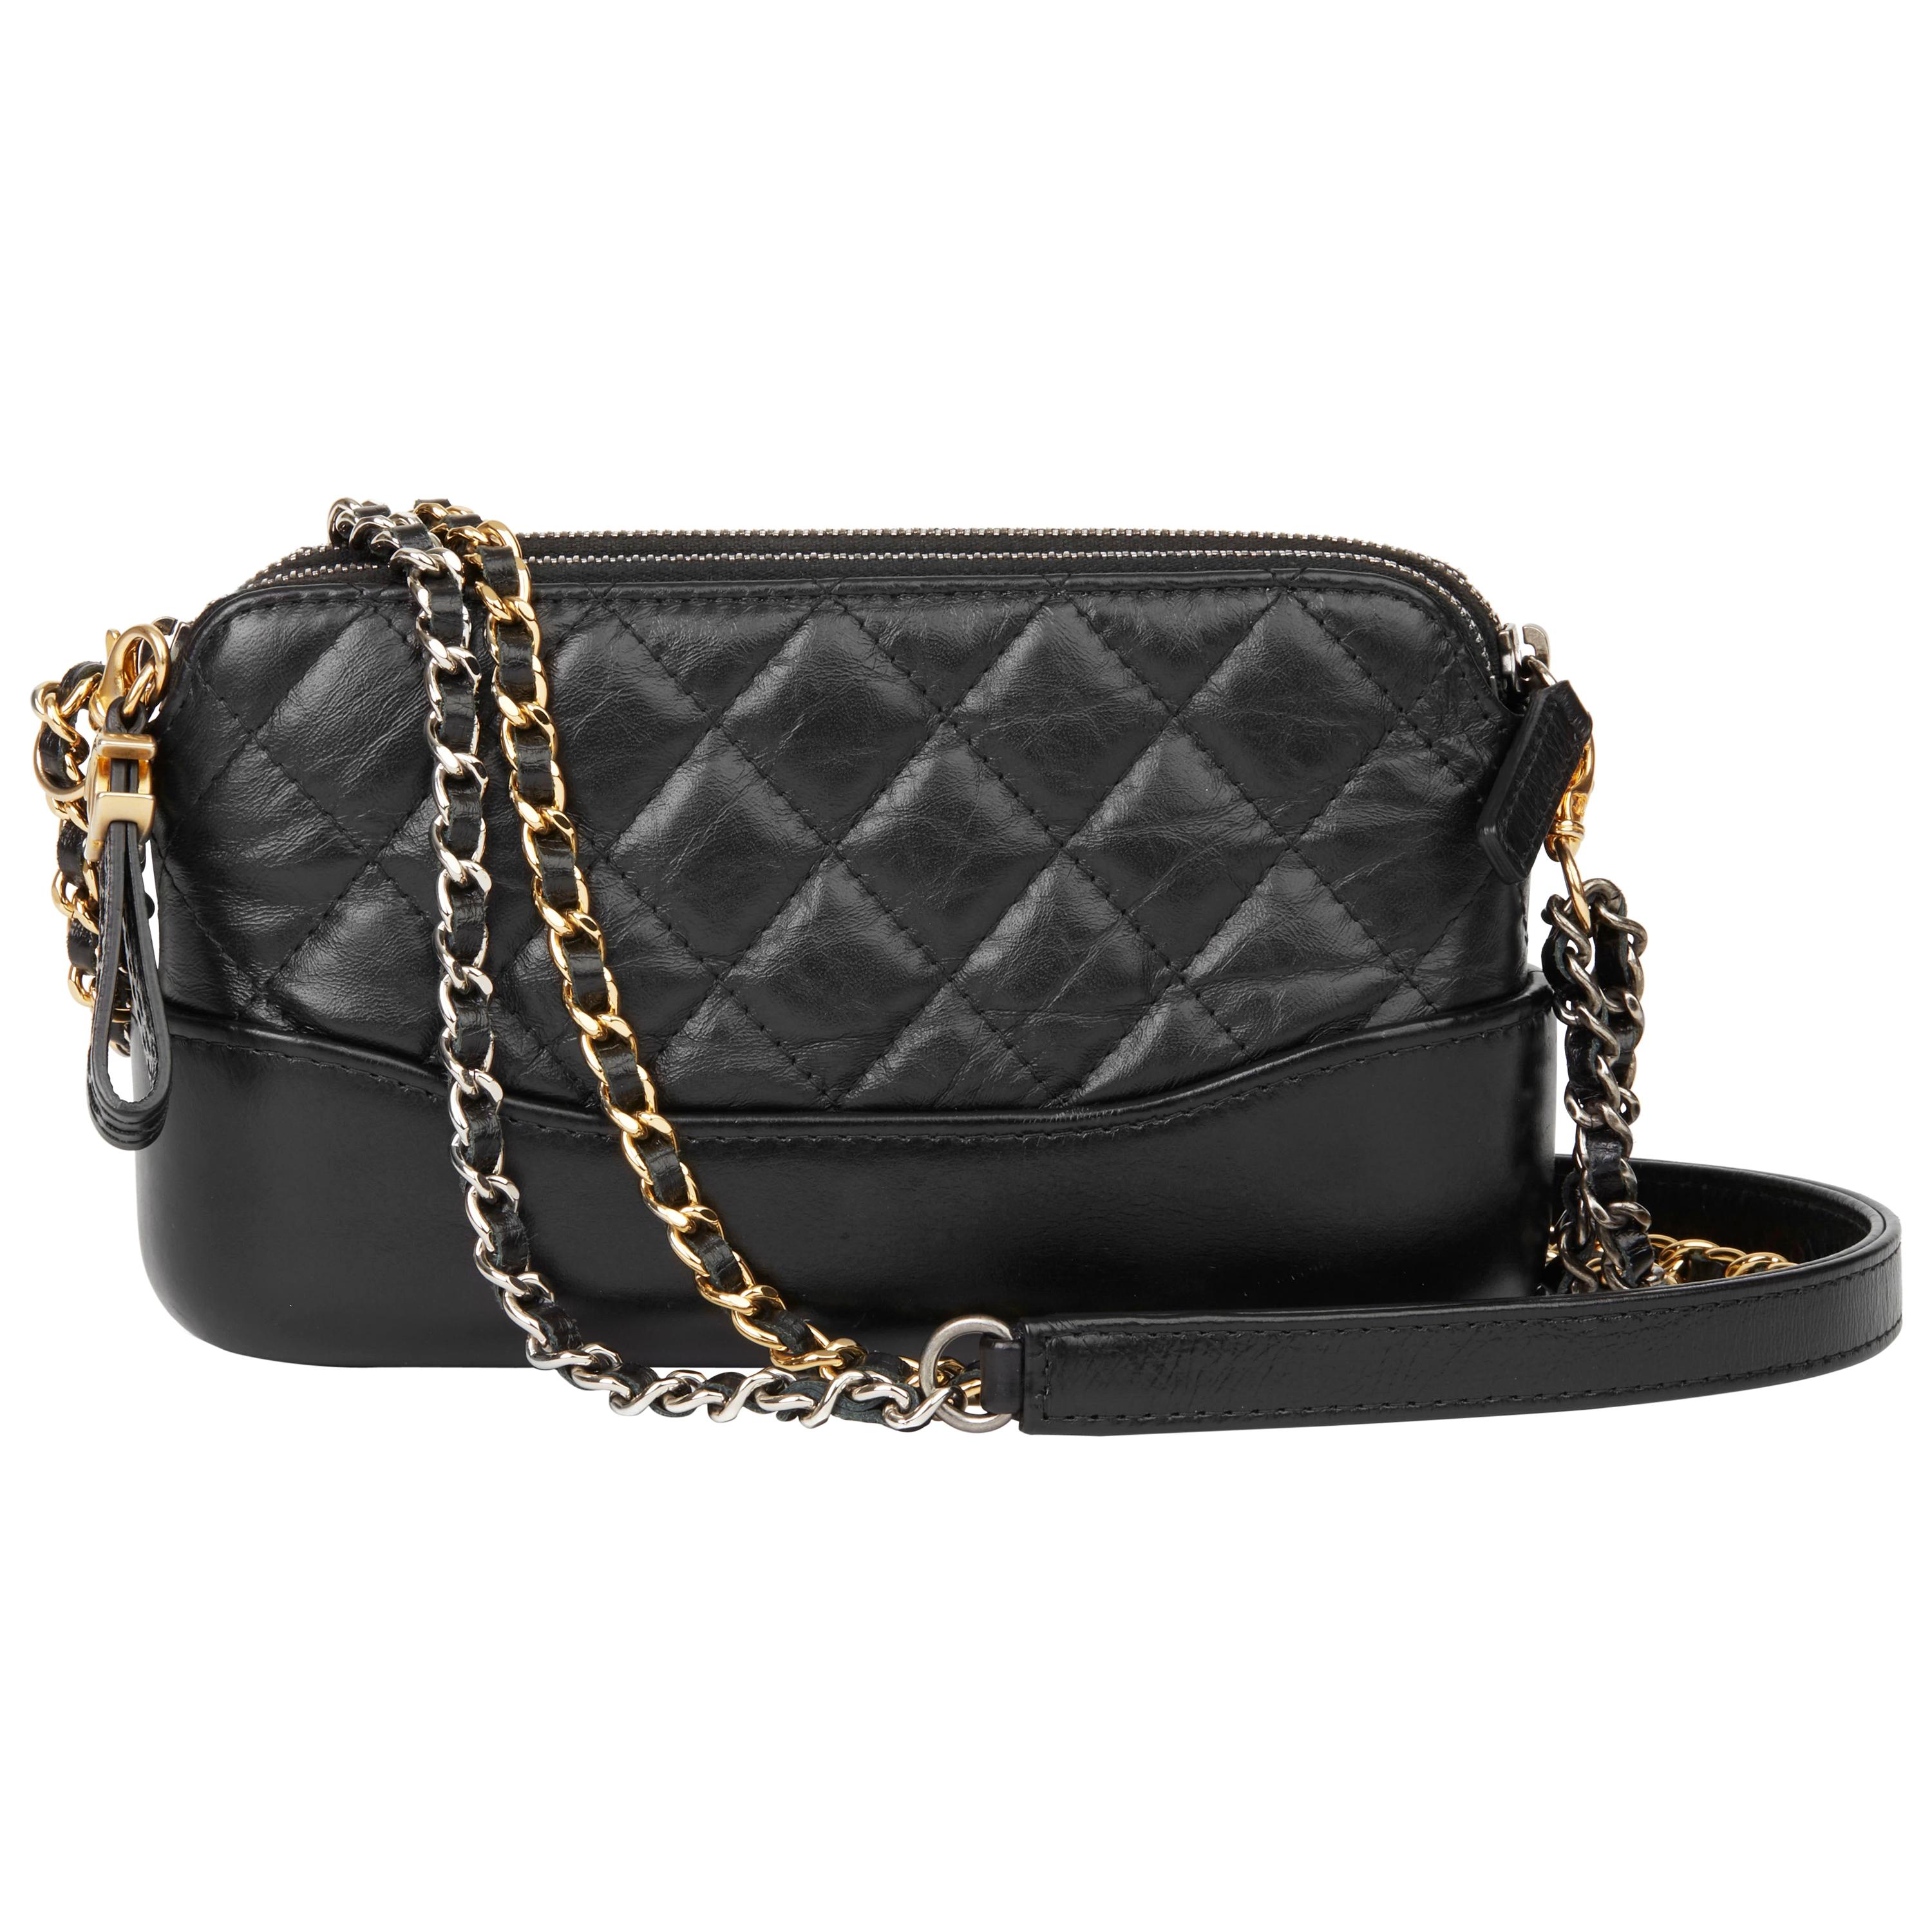 2018 Chanel Black Quilted Aged Calfskin Leather Gabrielle Clutch